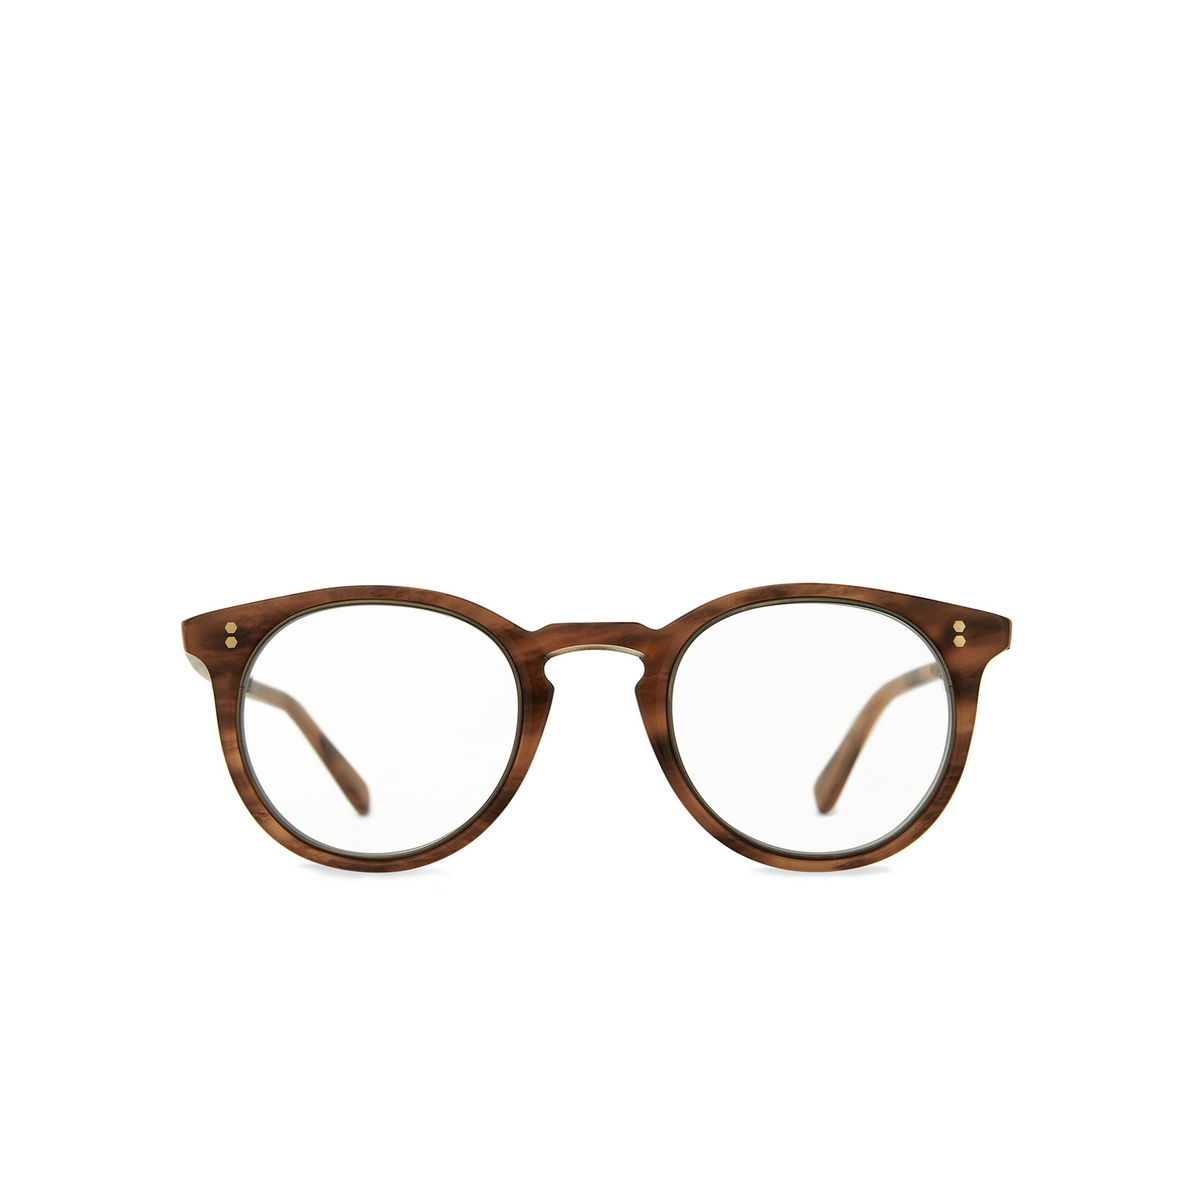 Mr. Leight CROSBY C Eyeglasses PAT-ATG Patchouli - Antique Gold - front view